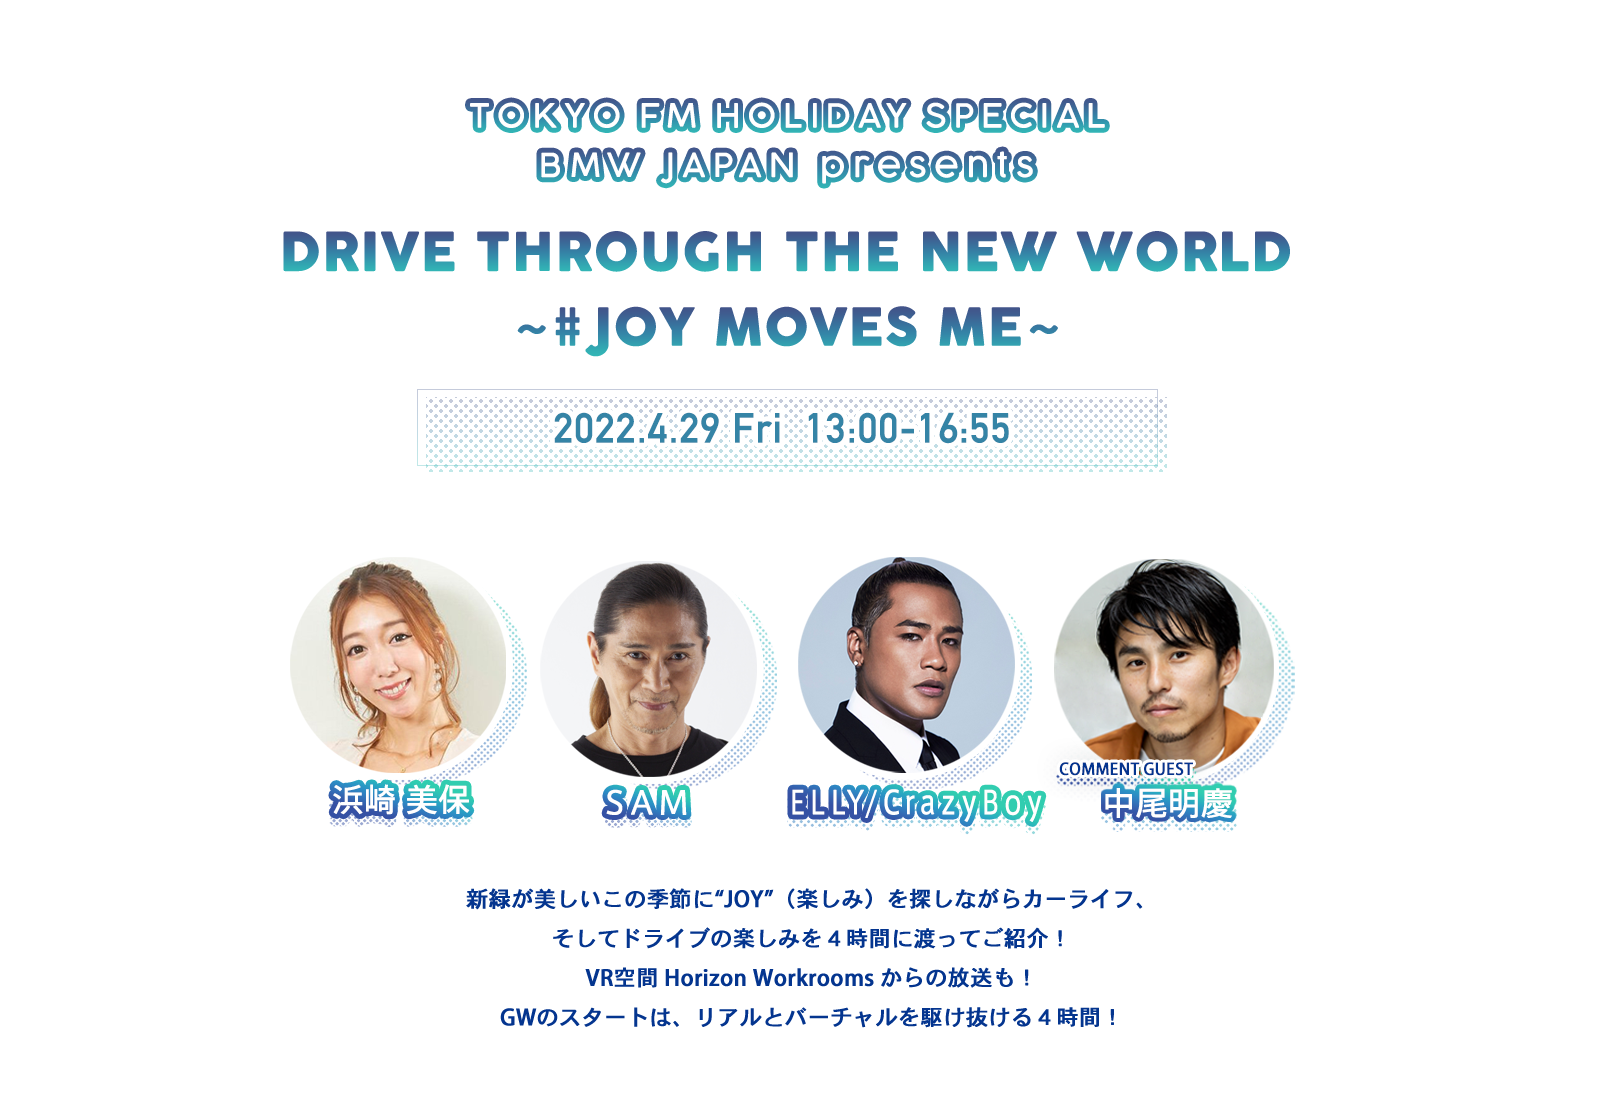 TOKYO FM HOLIDAY SPECIAL BMW JAPAN presents DRIVE THROUGH THE NEW WORLD ~#JOY MOVES ME~